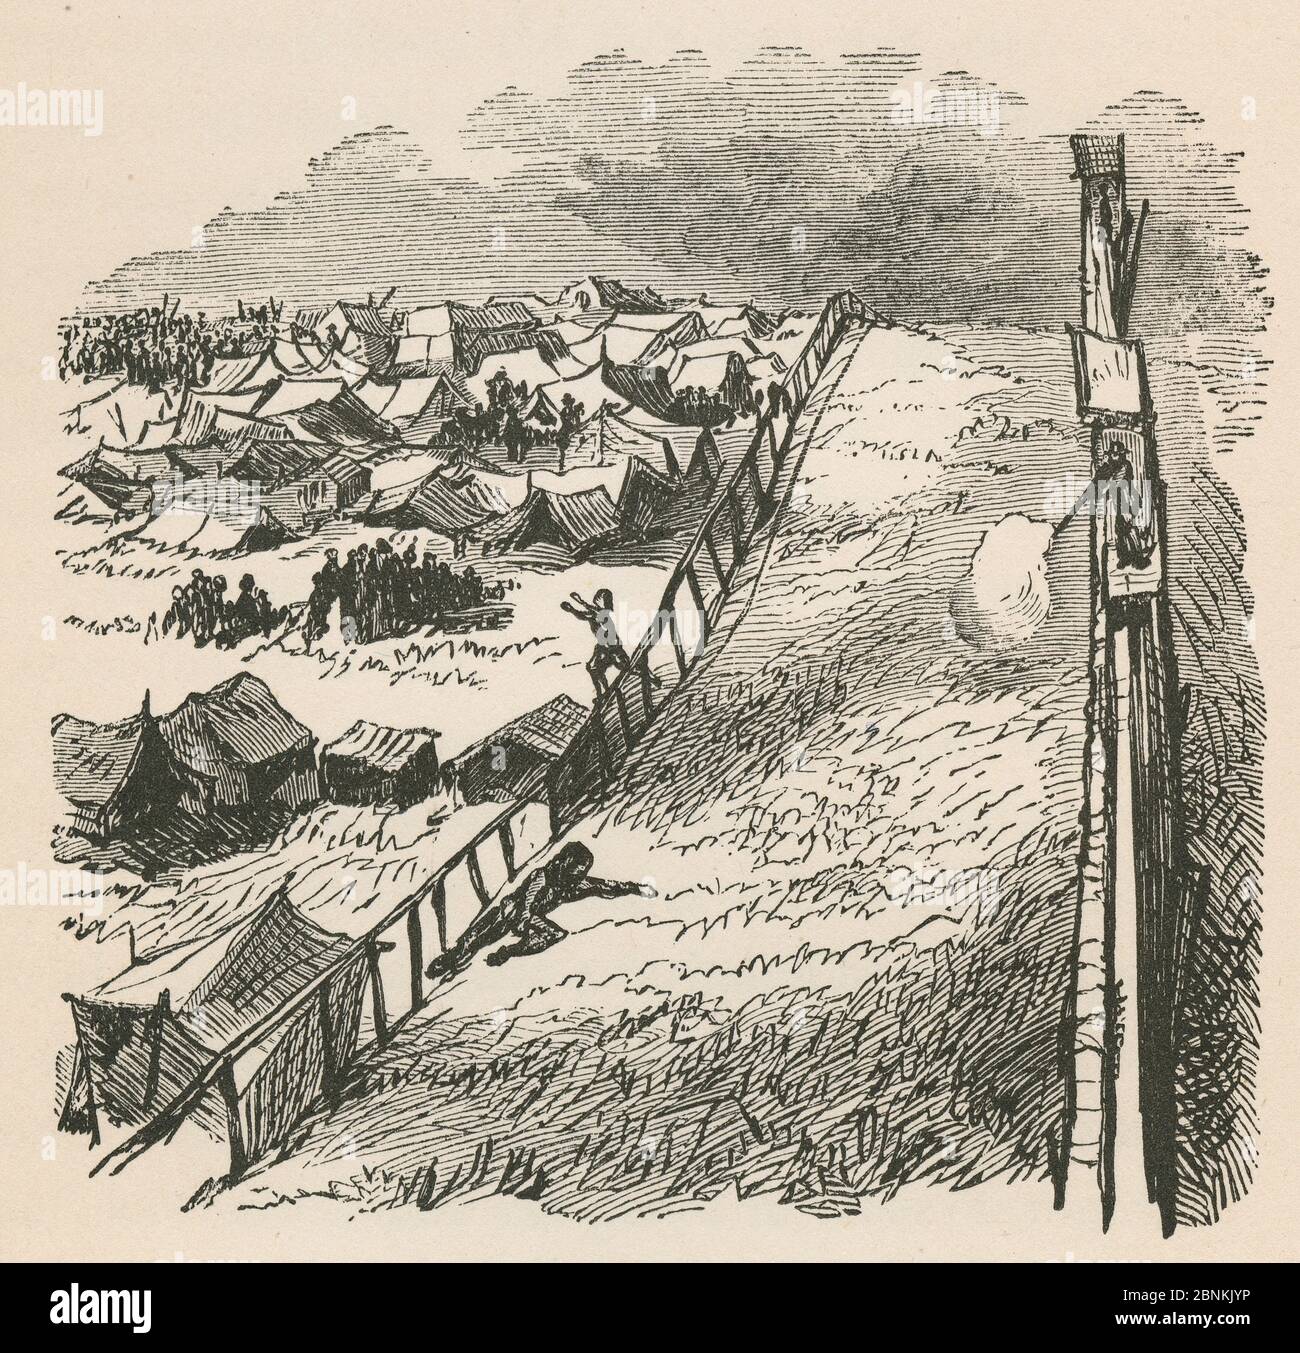 Antique 1866 engraving, “view of the palisade and dead line” from The Soldier's Story by Goss. “He announced his determination to die, and getting over the dead line, was shot through the heart.” Andersonville Prison was a Confederate prisoner of war camp in Andersonville, Georgia, during the American Civil War. SOURCE: ORIGINAL ENGRAVING Stock Photo